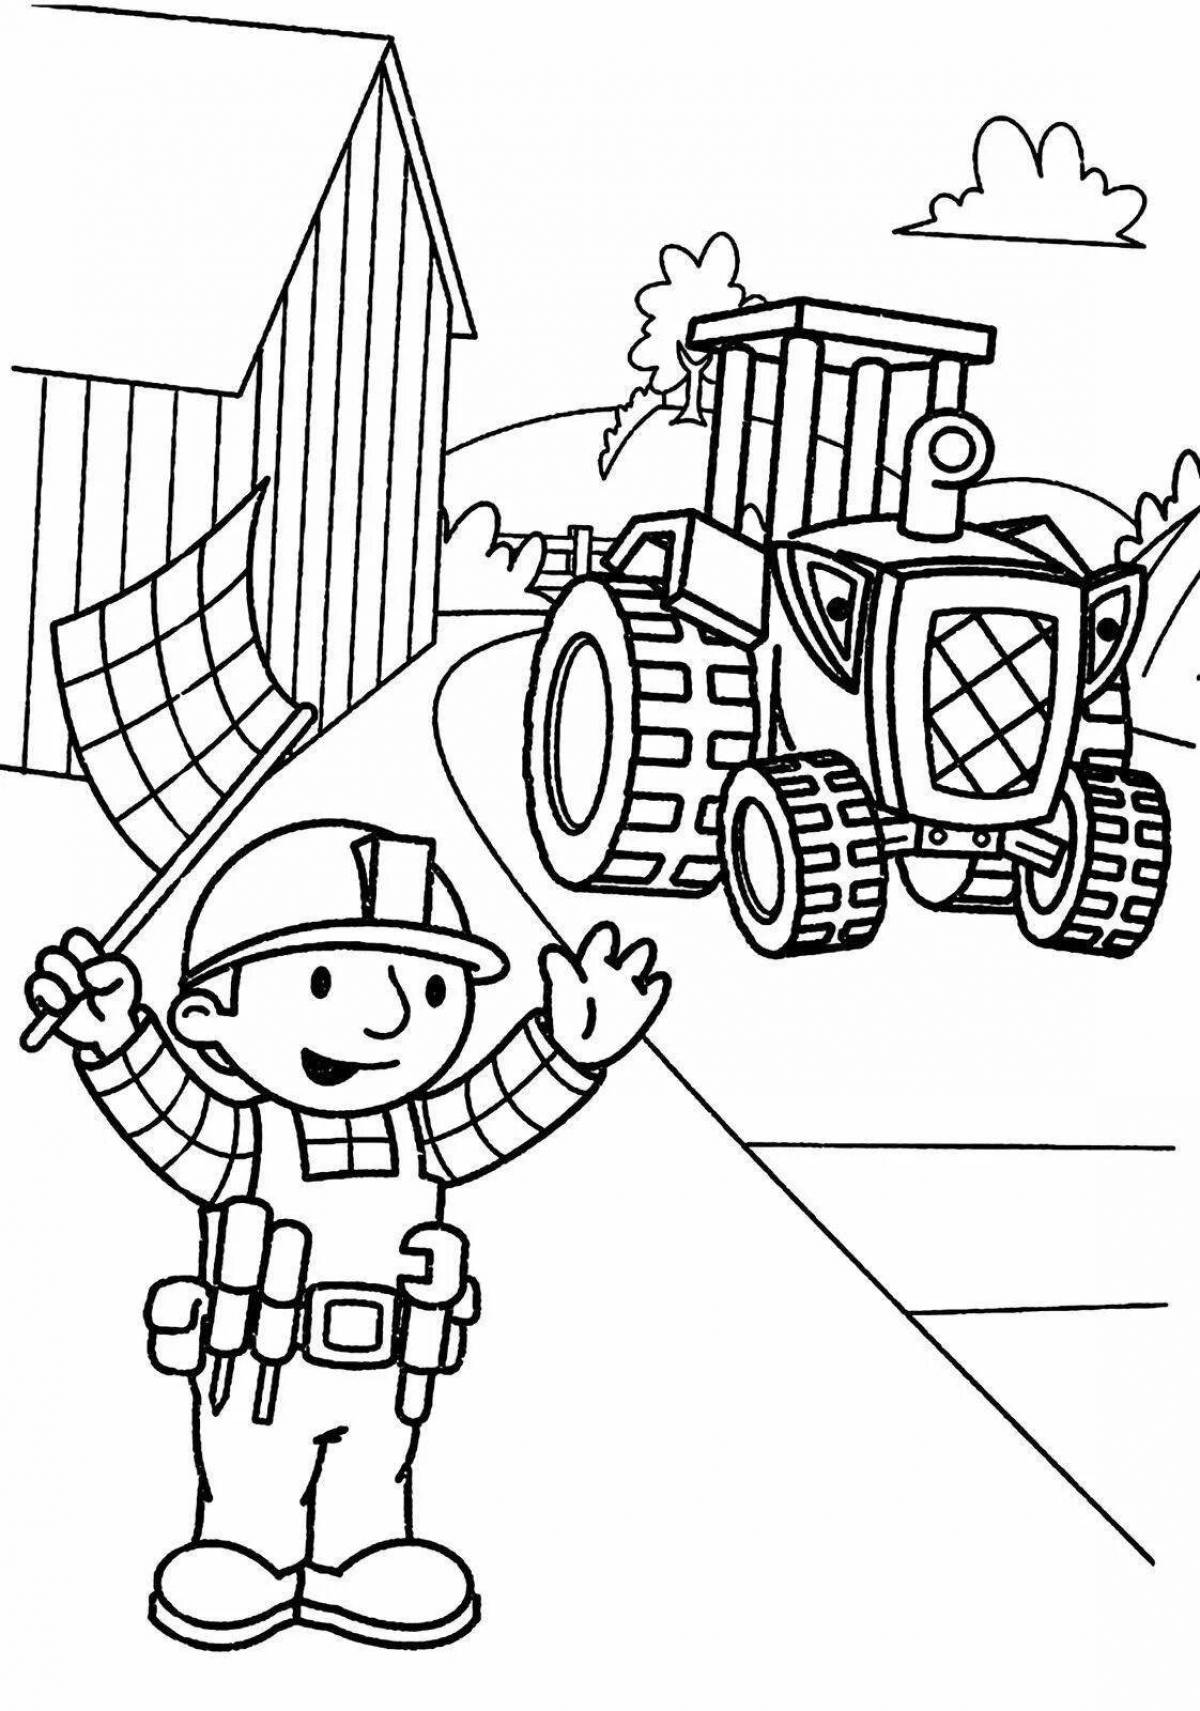 Great building coloring book for boys